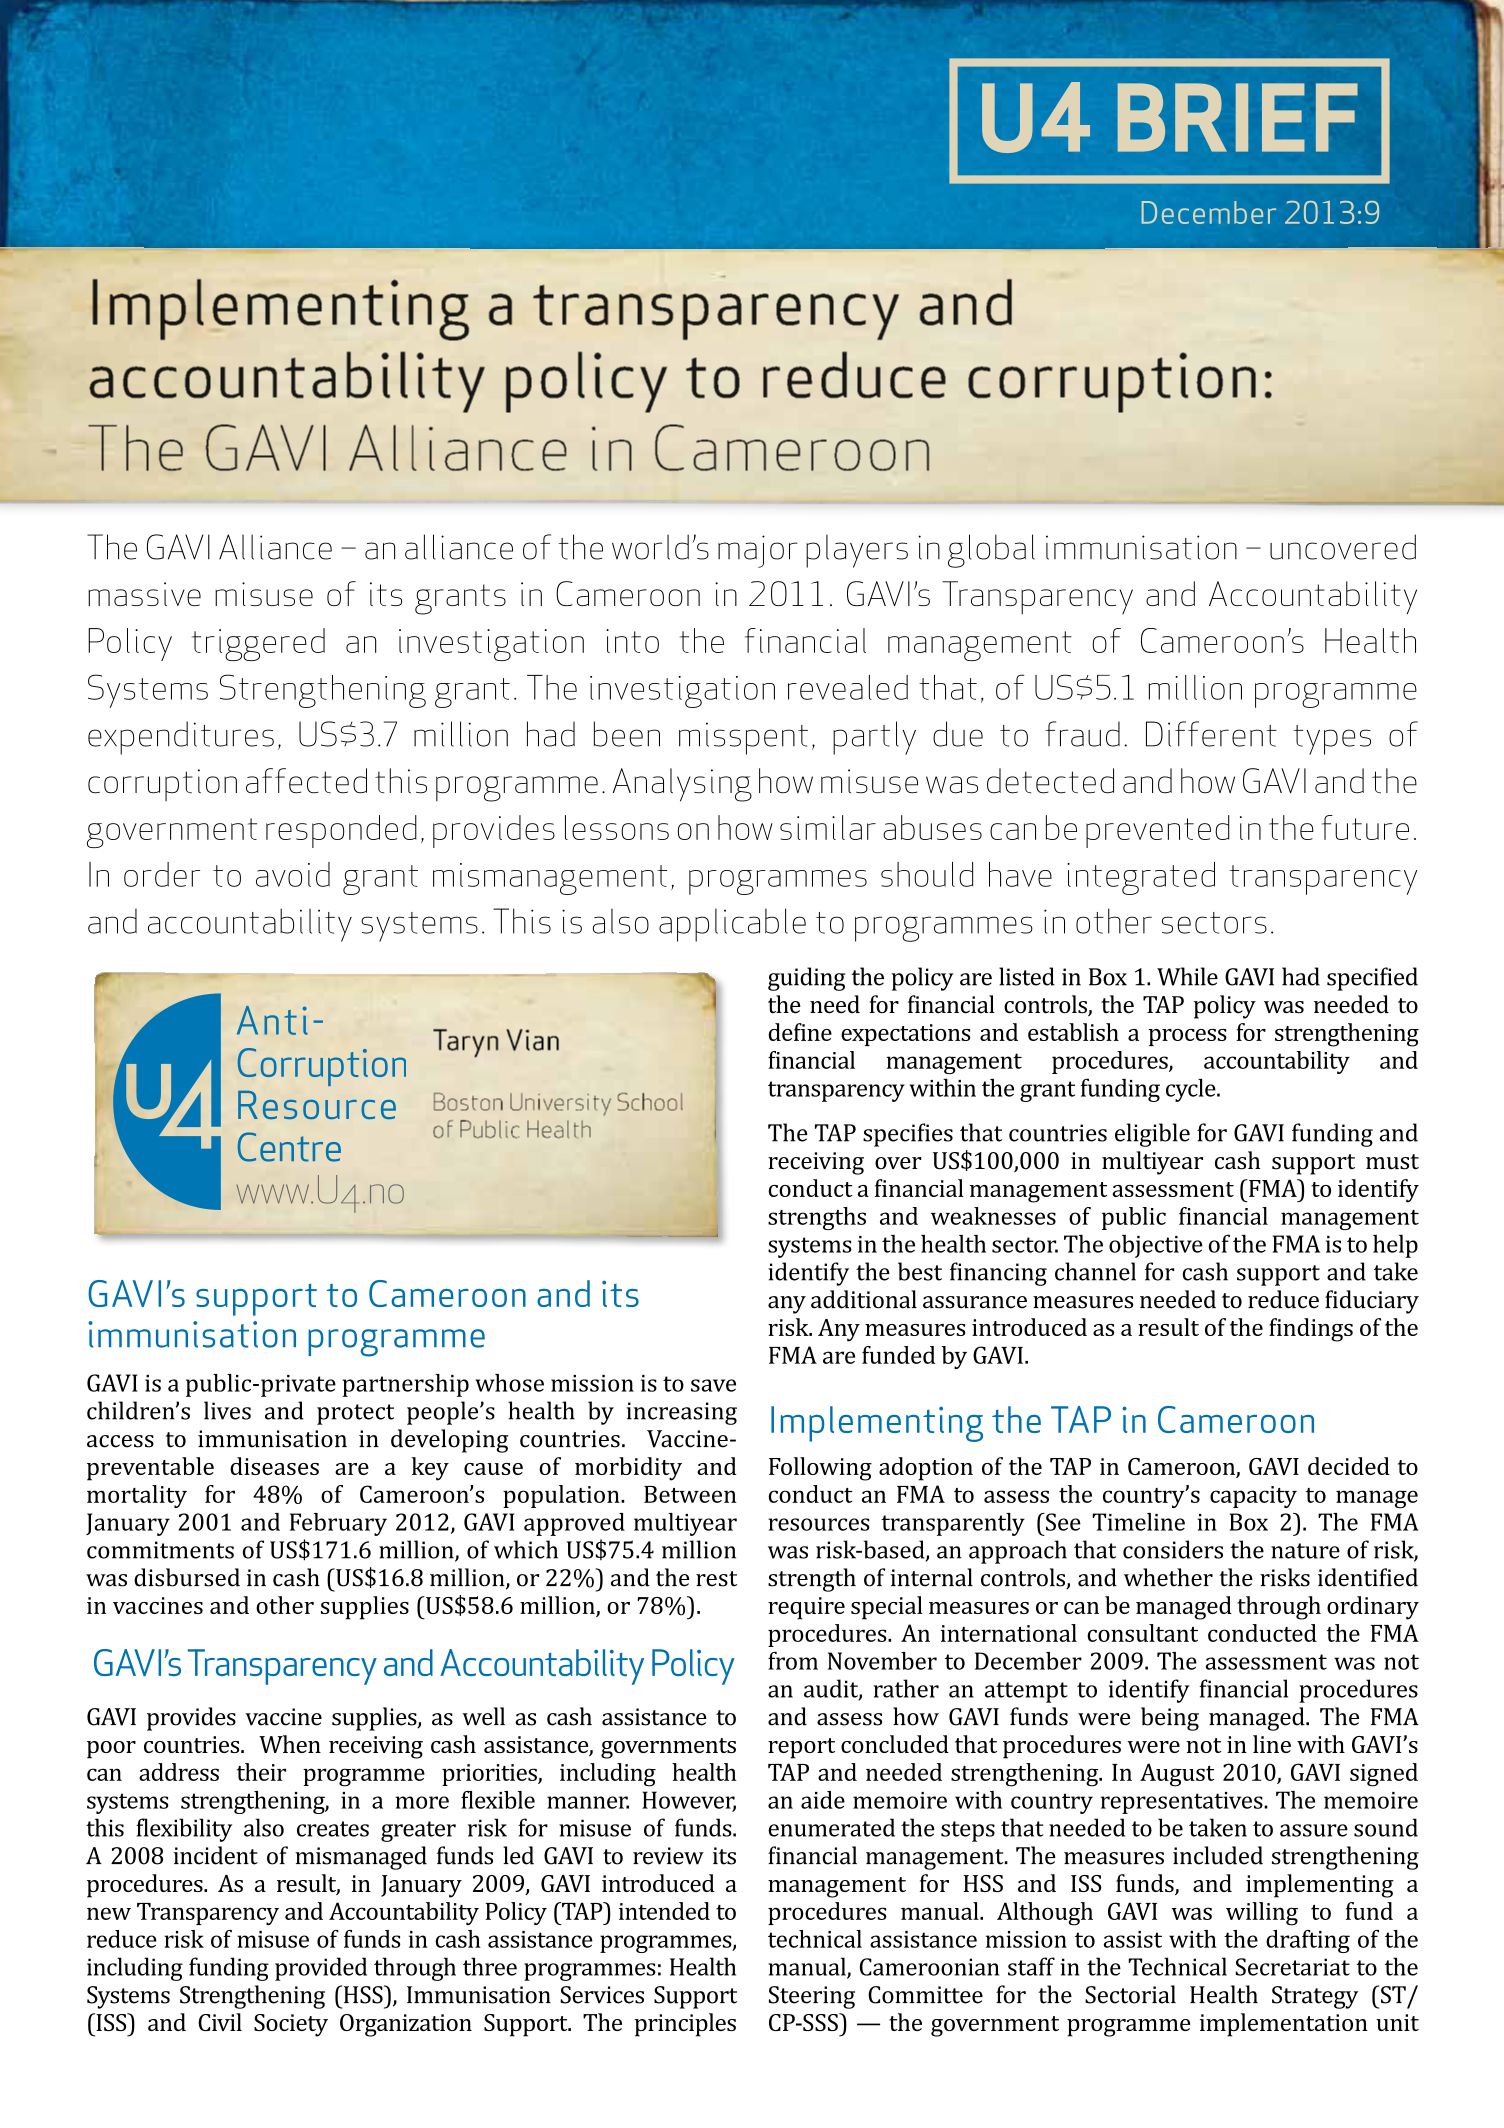 Implementing a transparency and accountability policy to reduce corruption: The GAVI Alliance in Cameroon